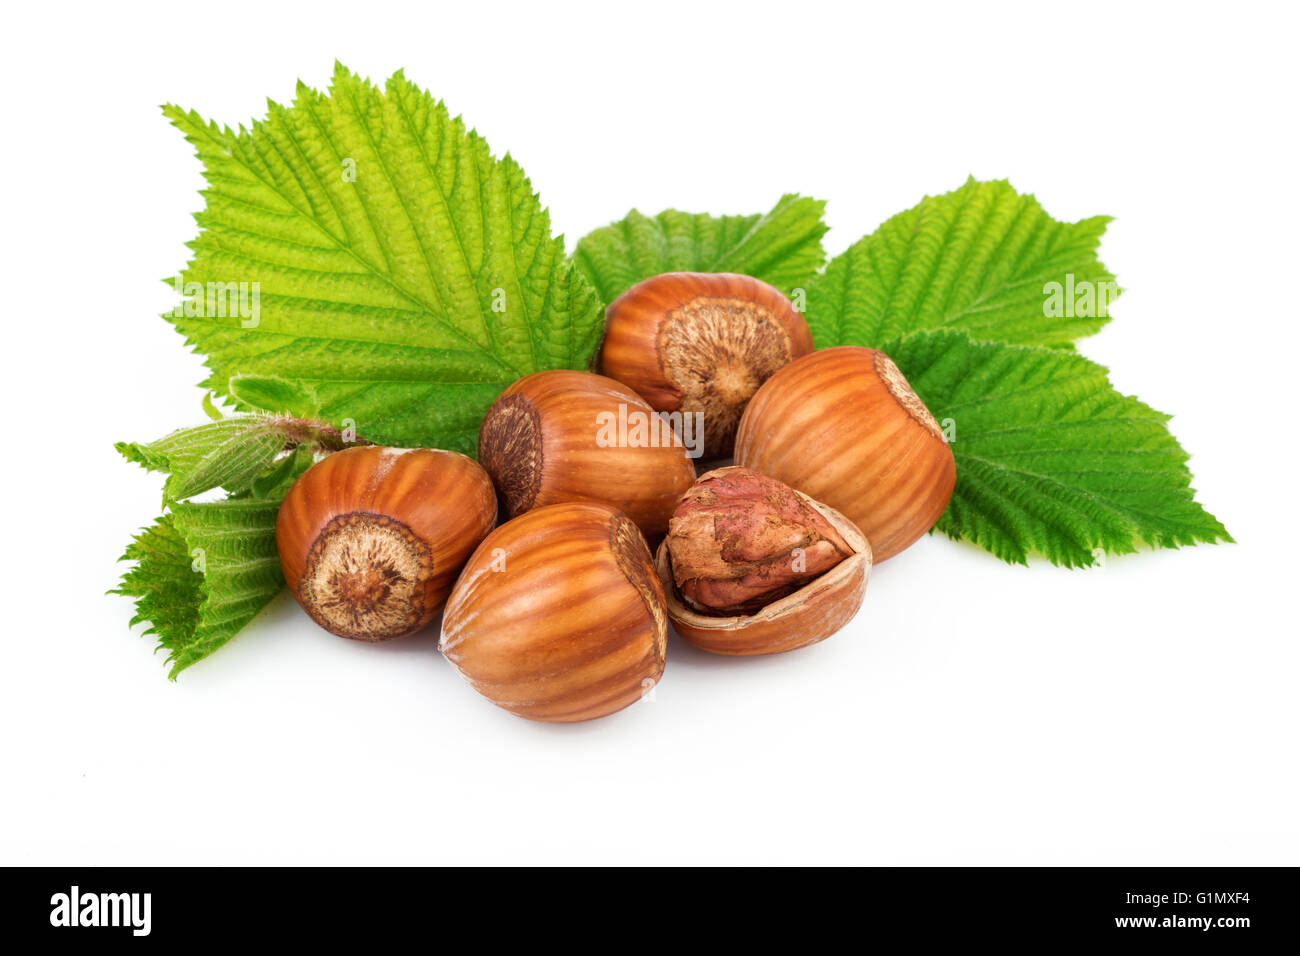 Filbert nuts with leaves on white background Stock Photo